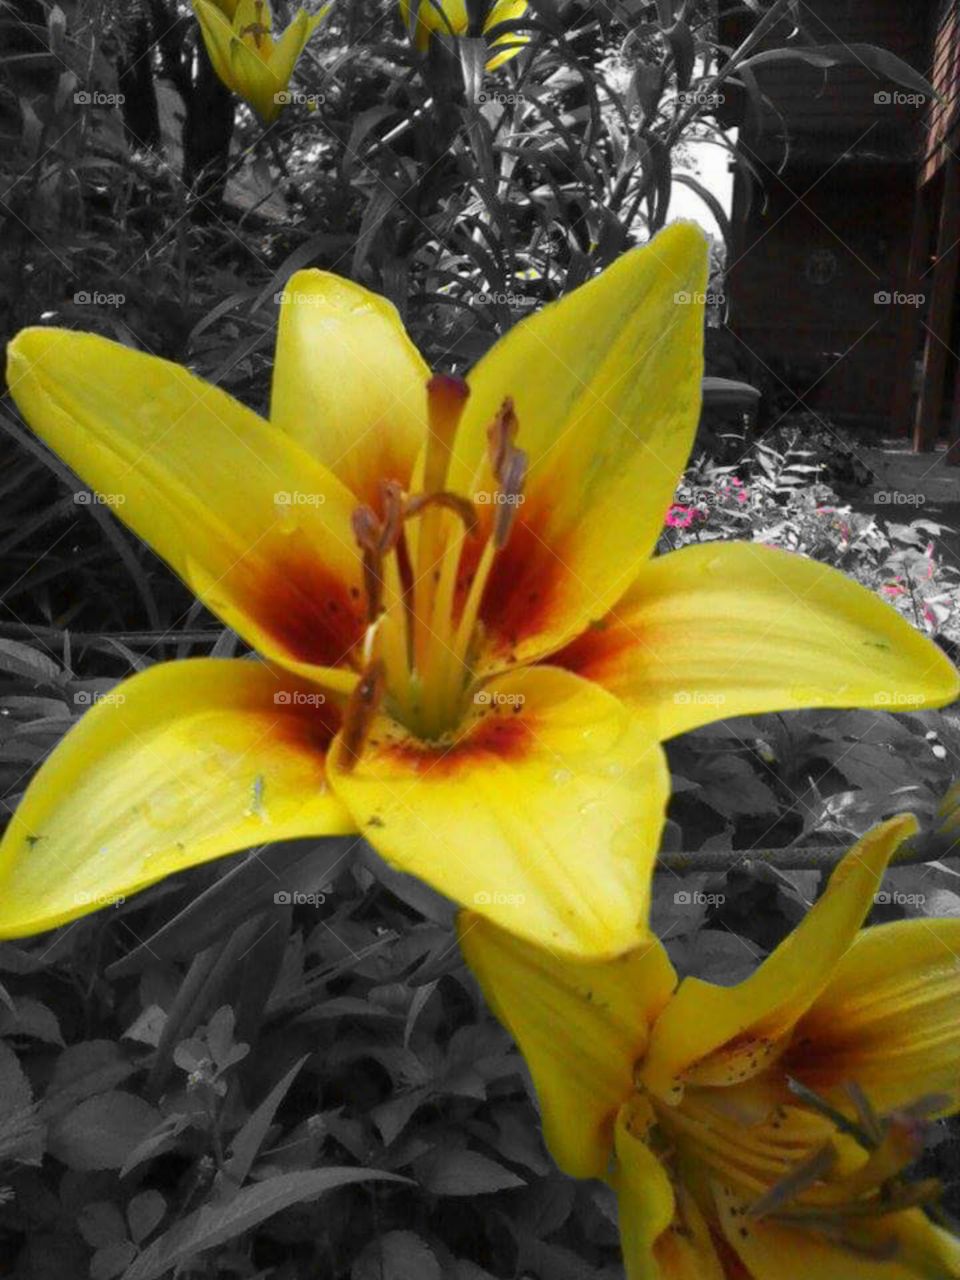 mellow red and yellow. color pop edit of some flowers i captured enjoying the daylight